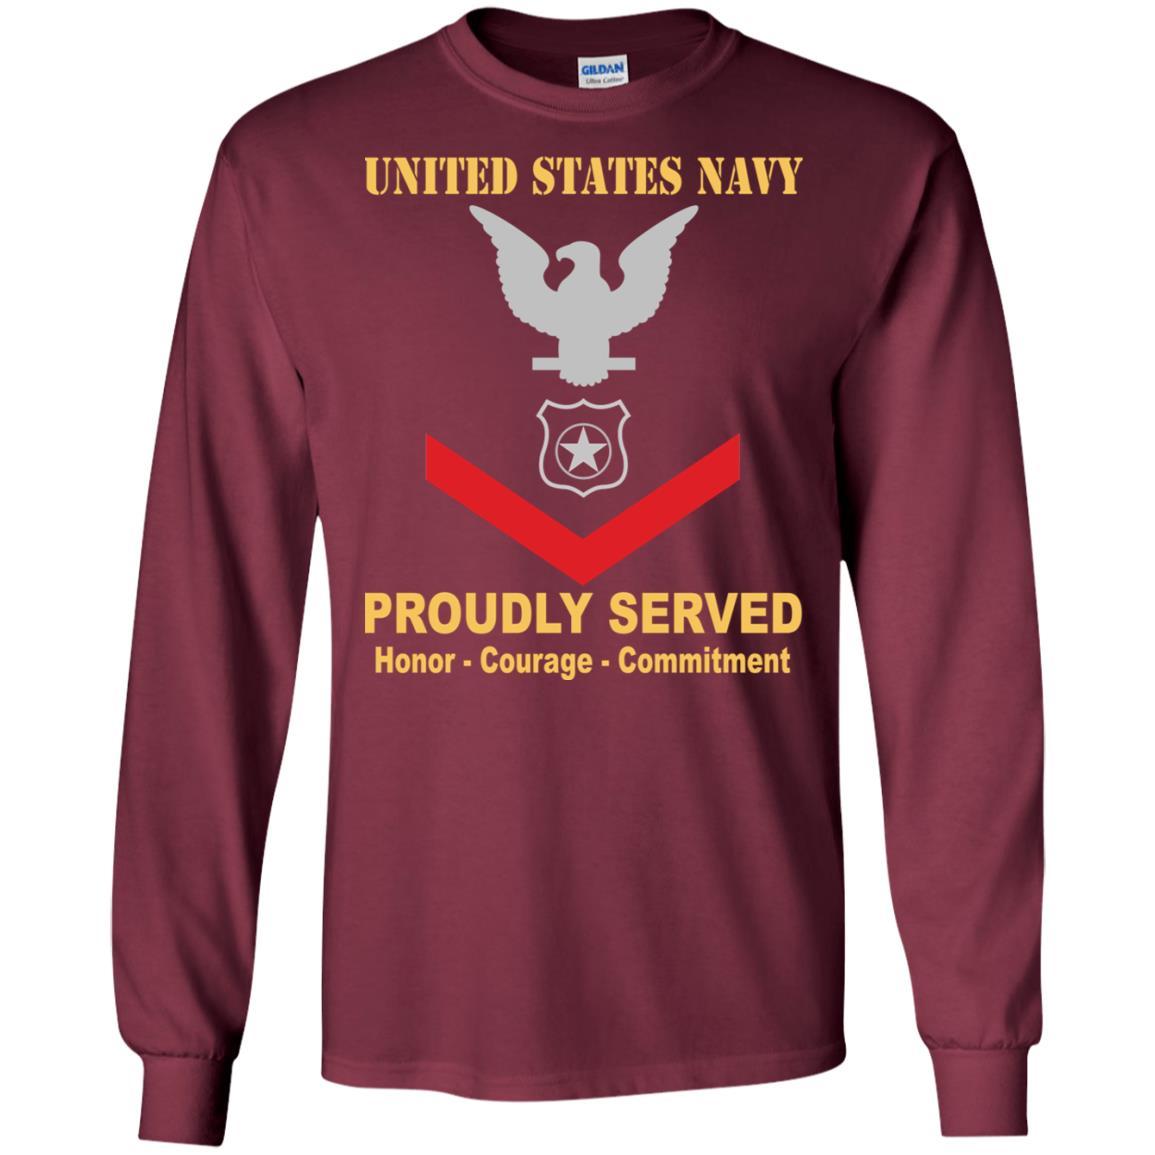 U.S Navy Master-at-arms Navy MA E-4 Rating Badges Proudly Served T-Shirt For Men On Front-TShirt-Navy-Veterans Nation